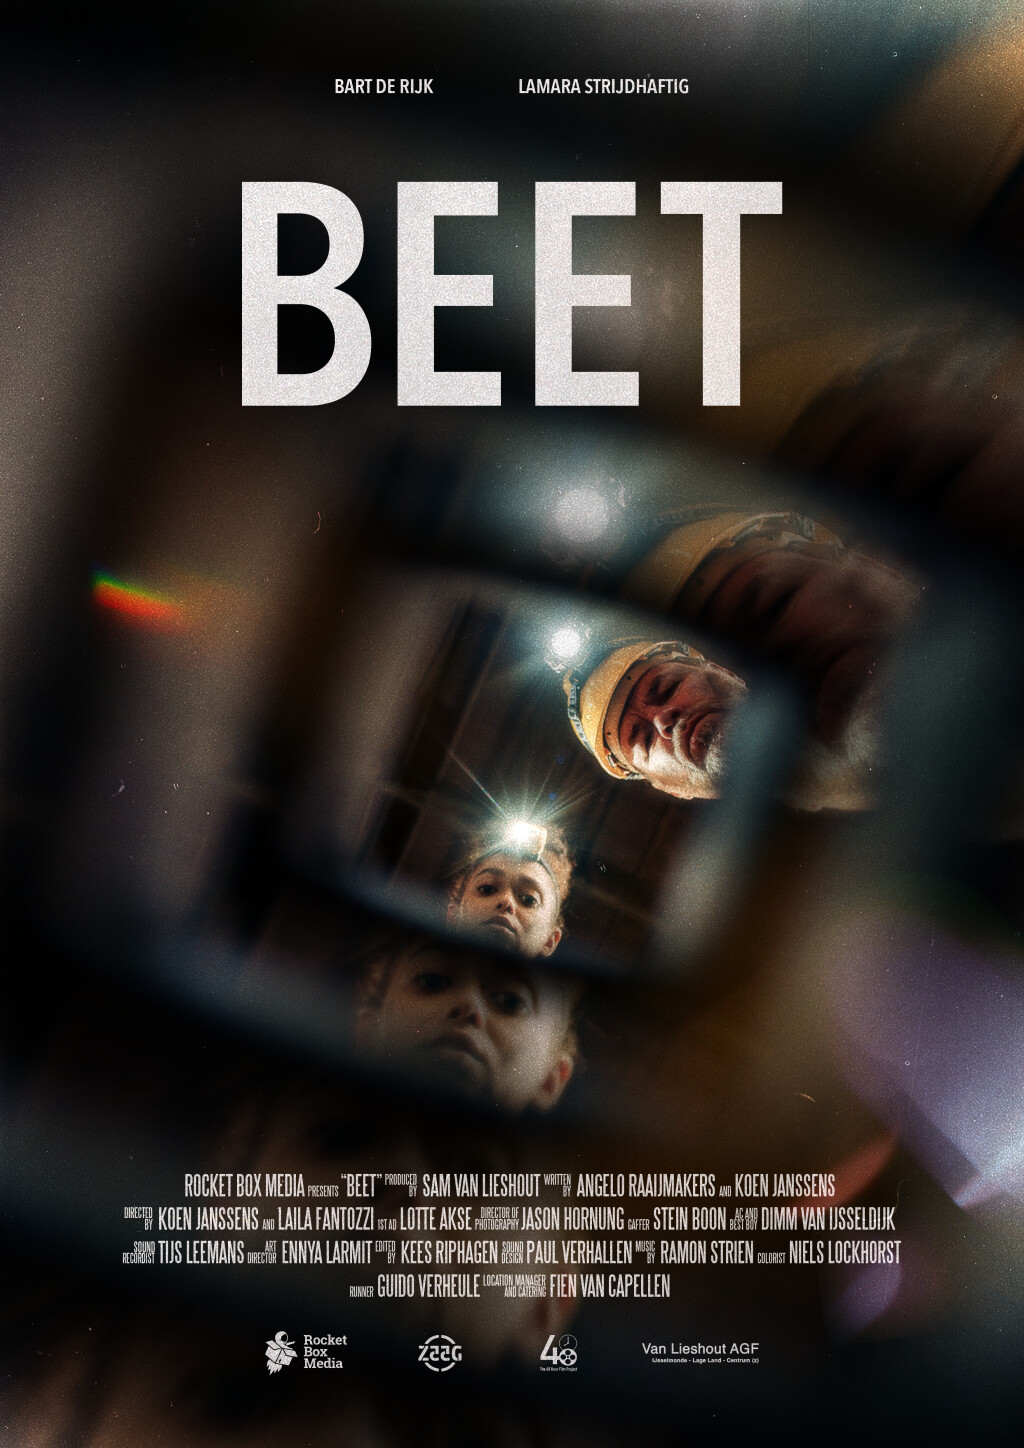 Filmposter for Beet